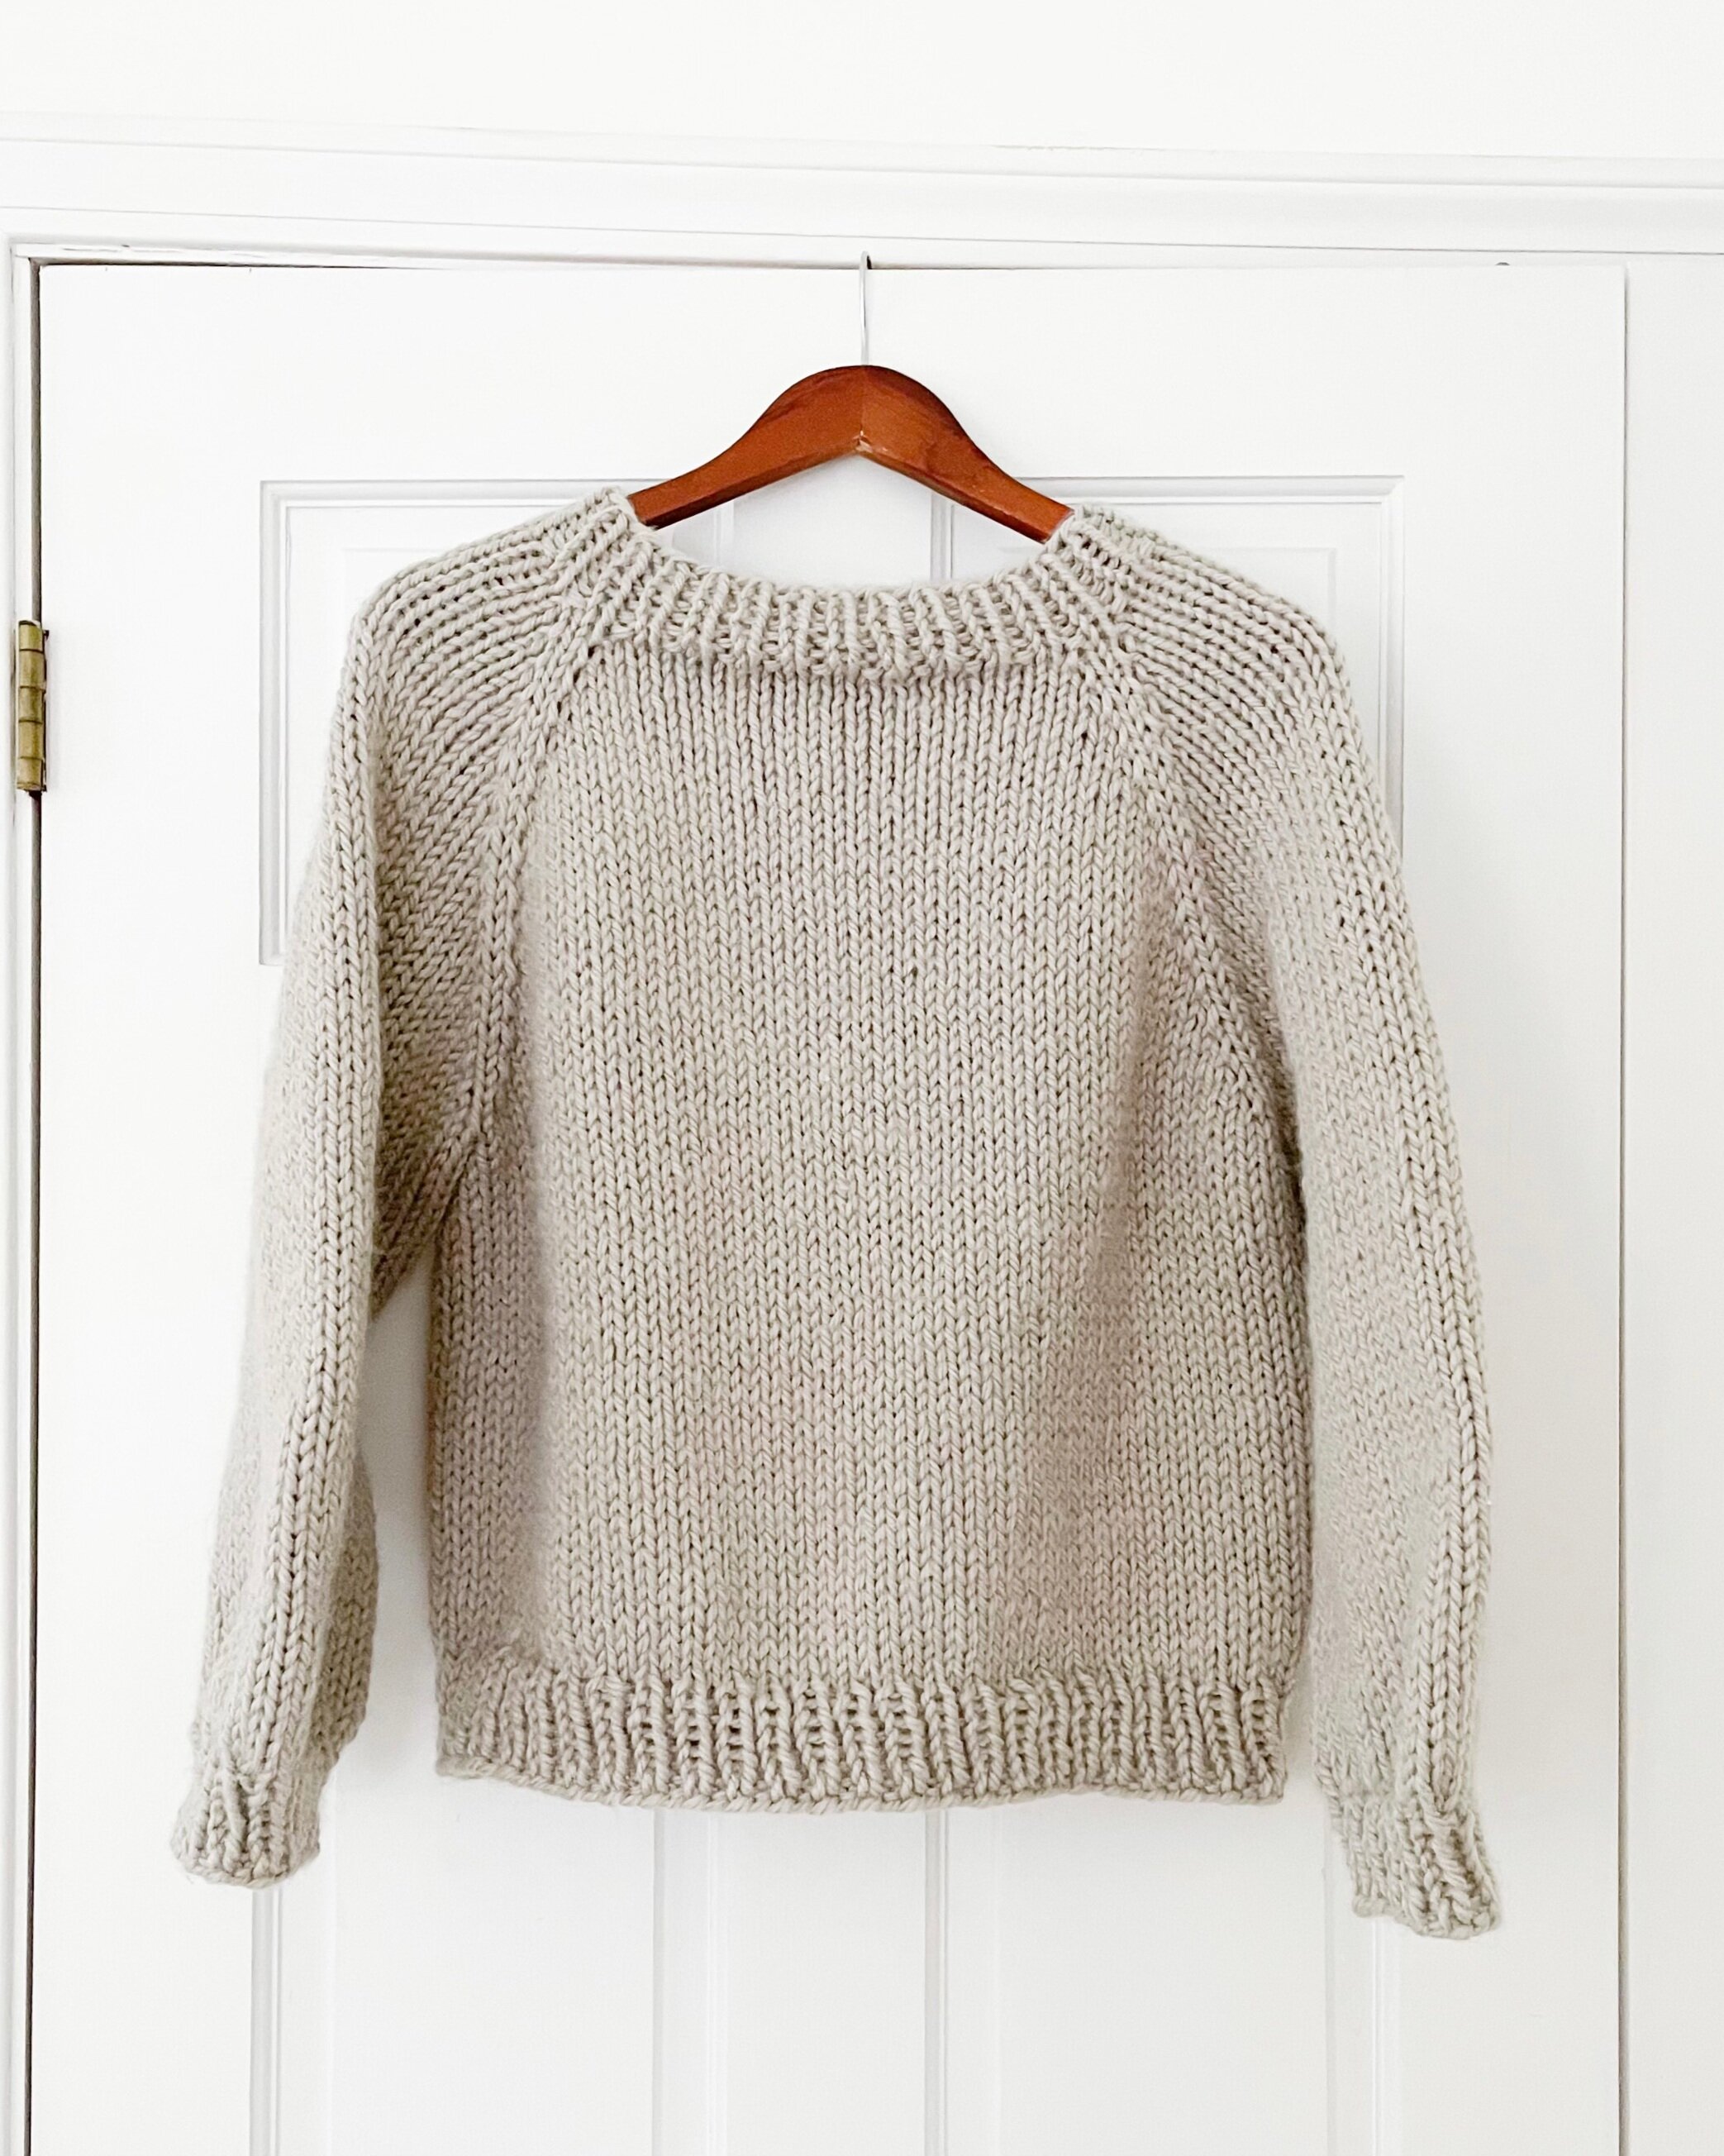 27 Free Sweater Knitting Patterns - Best of the Best